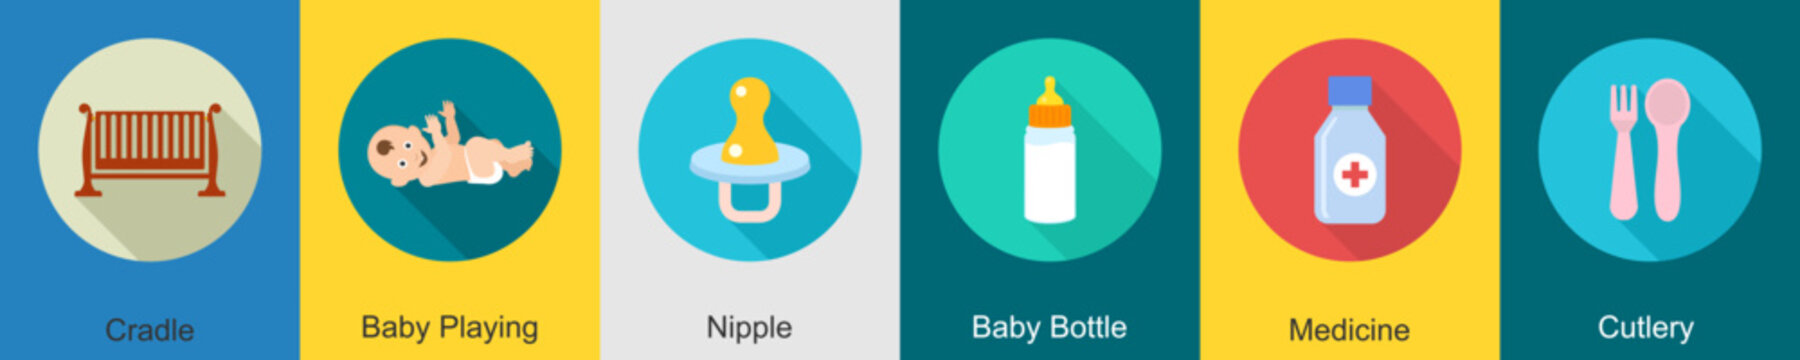 A set of 6 Baby icons as cradle, baby playing, nipple